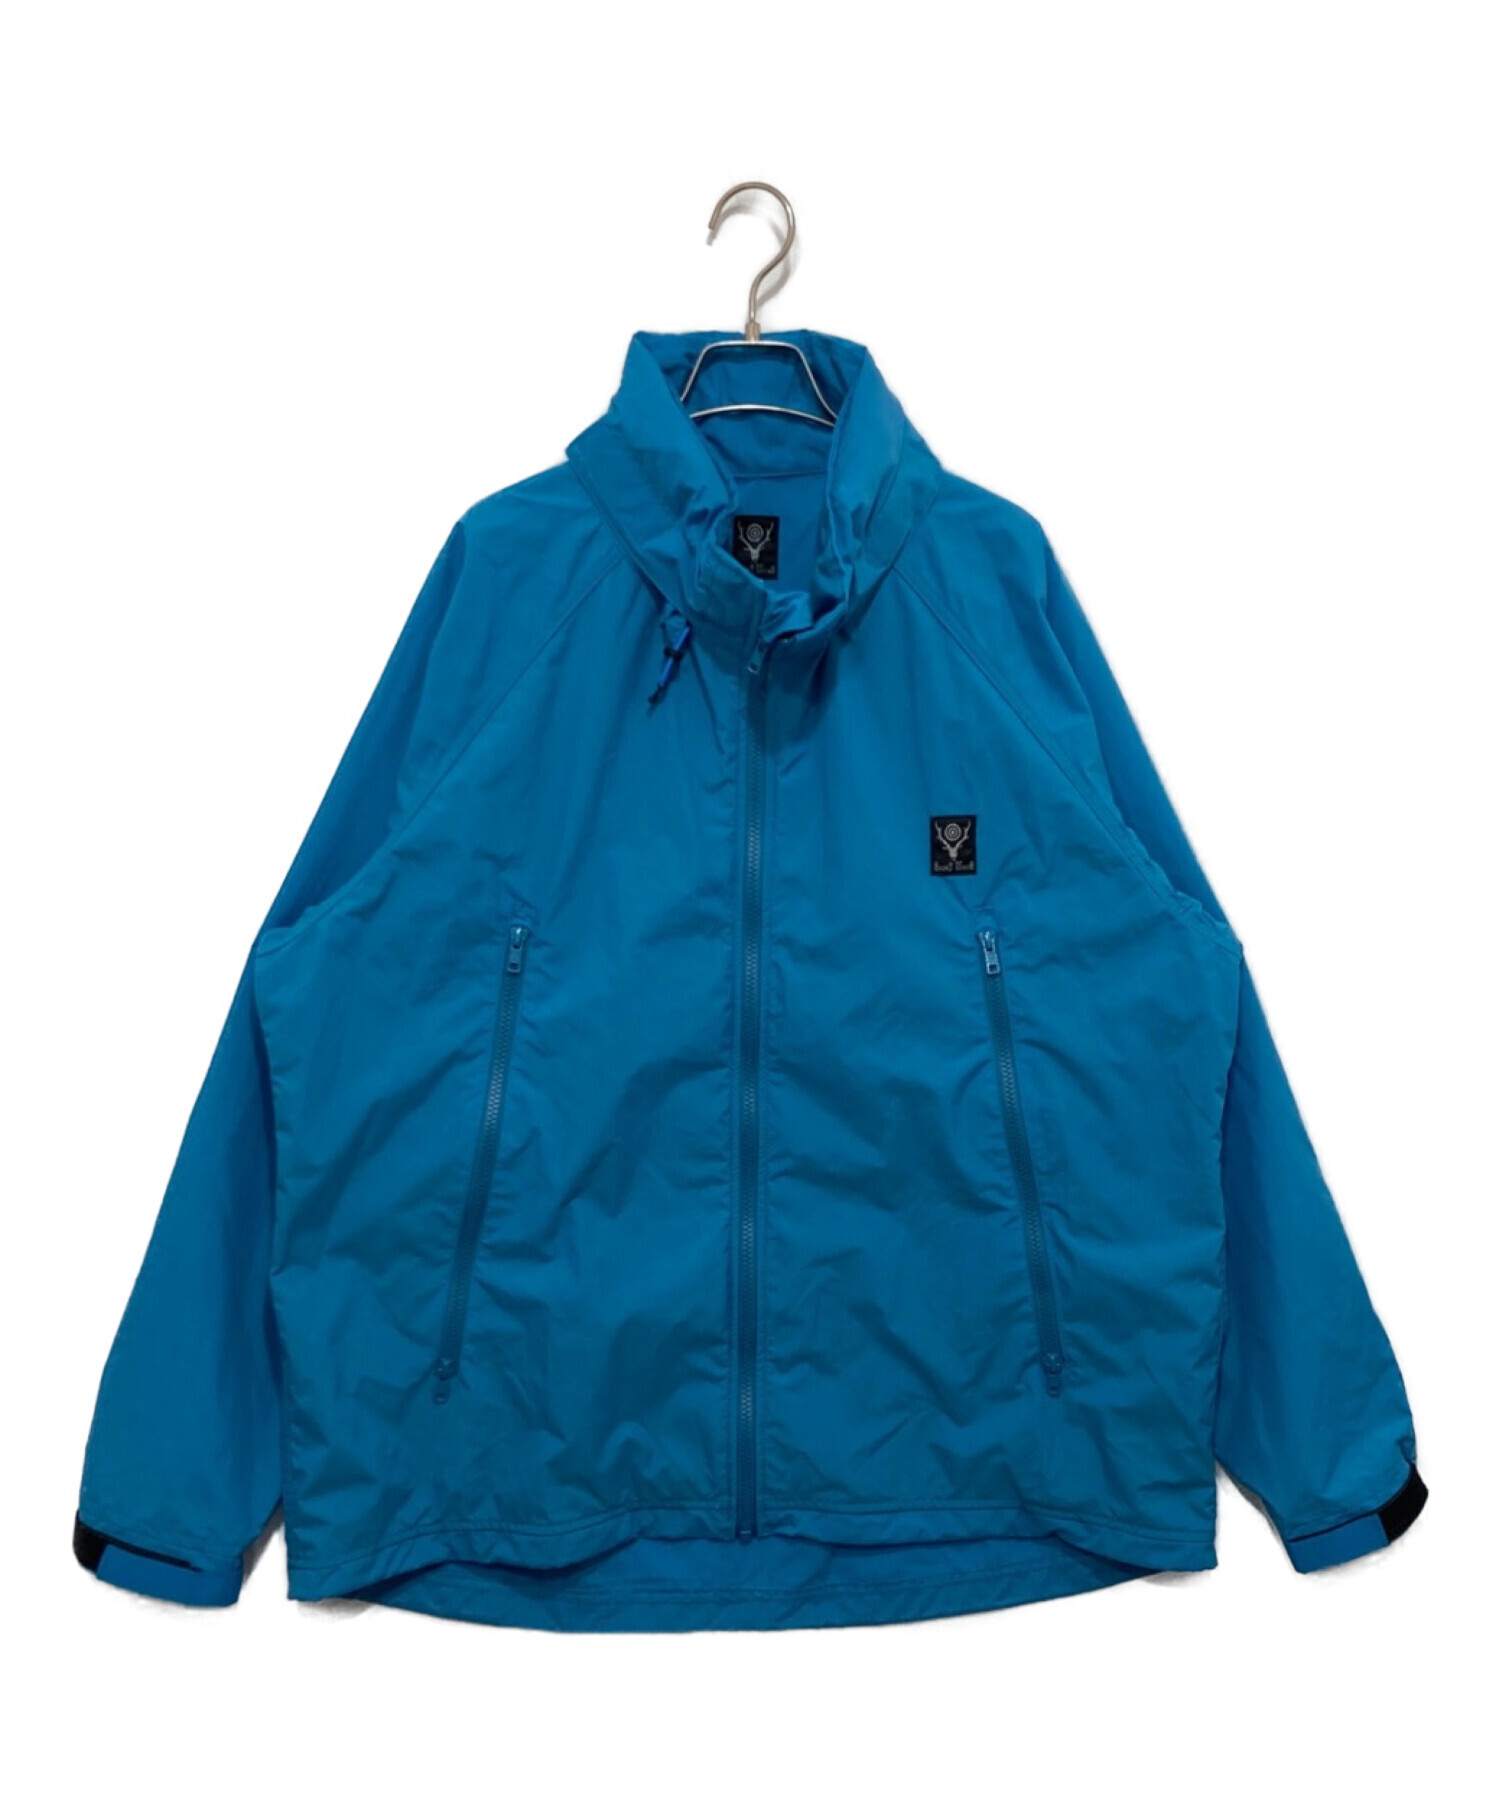 South2 West8 (サウスツー ウエストエイト) Weather Effect Jacket ブルー サイズ:Ｓ